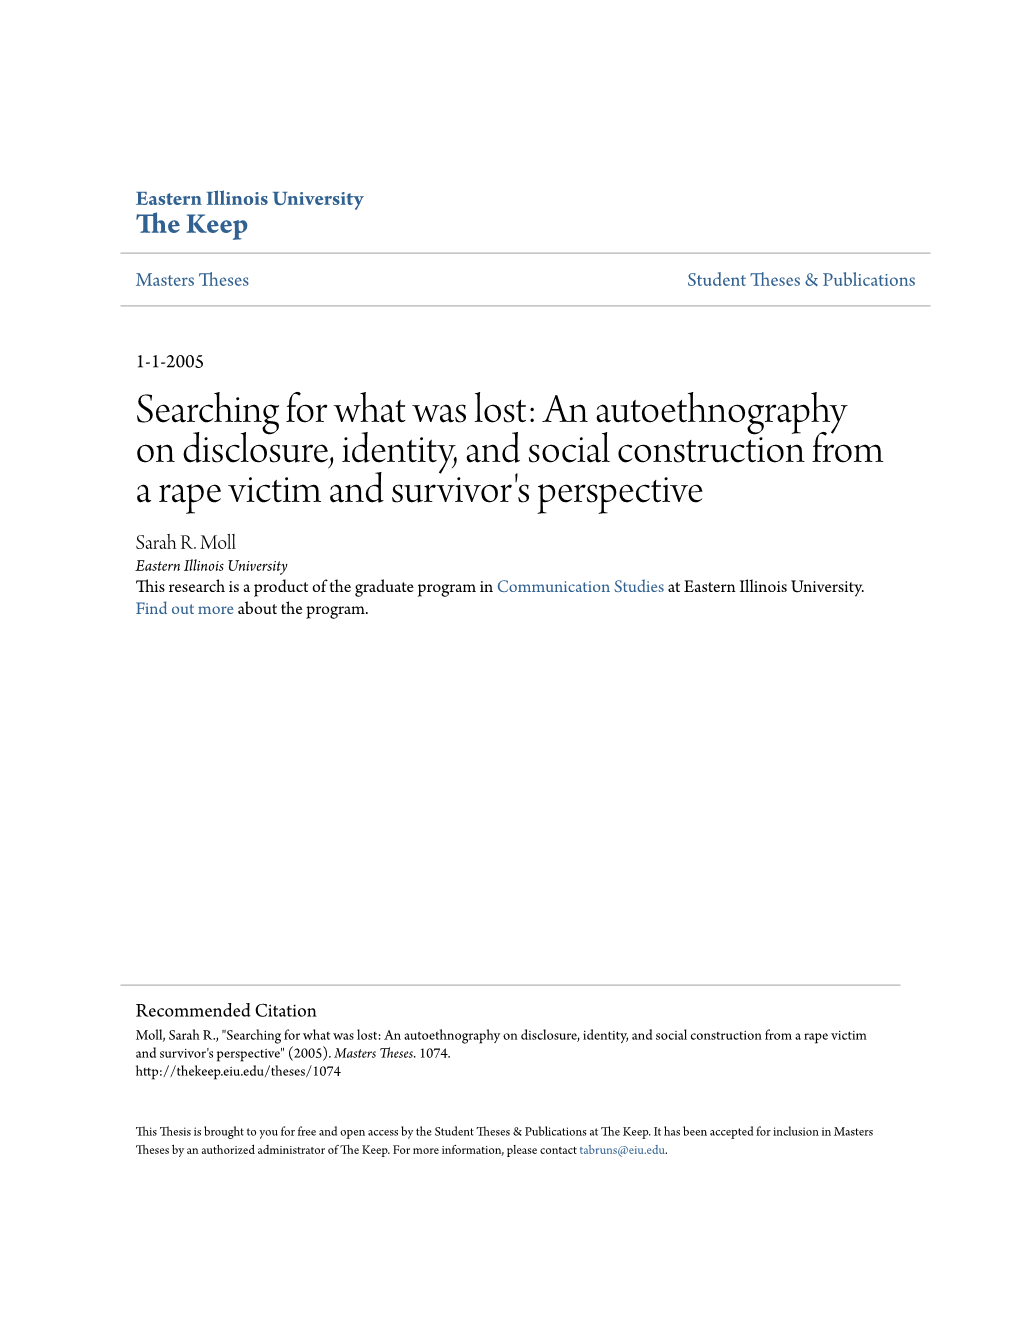 An Autoethnography on Disclosure, Identity, and Social Construction from a Rape Victim and Survivor's Perspective Sarah R